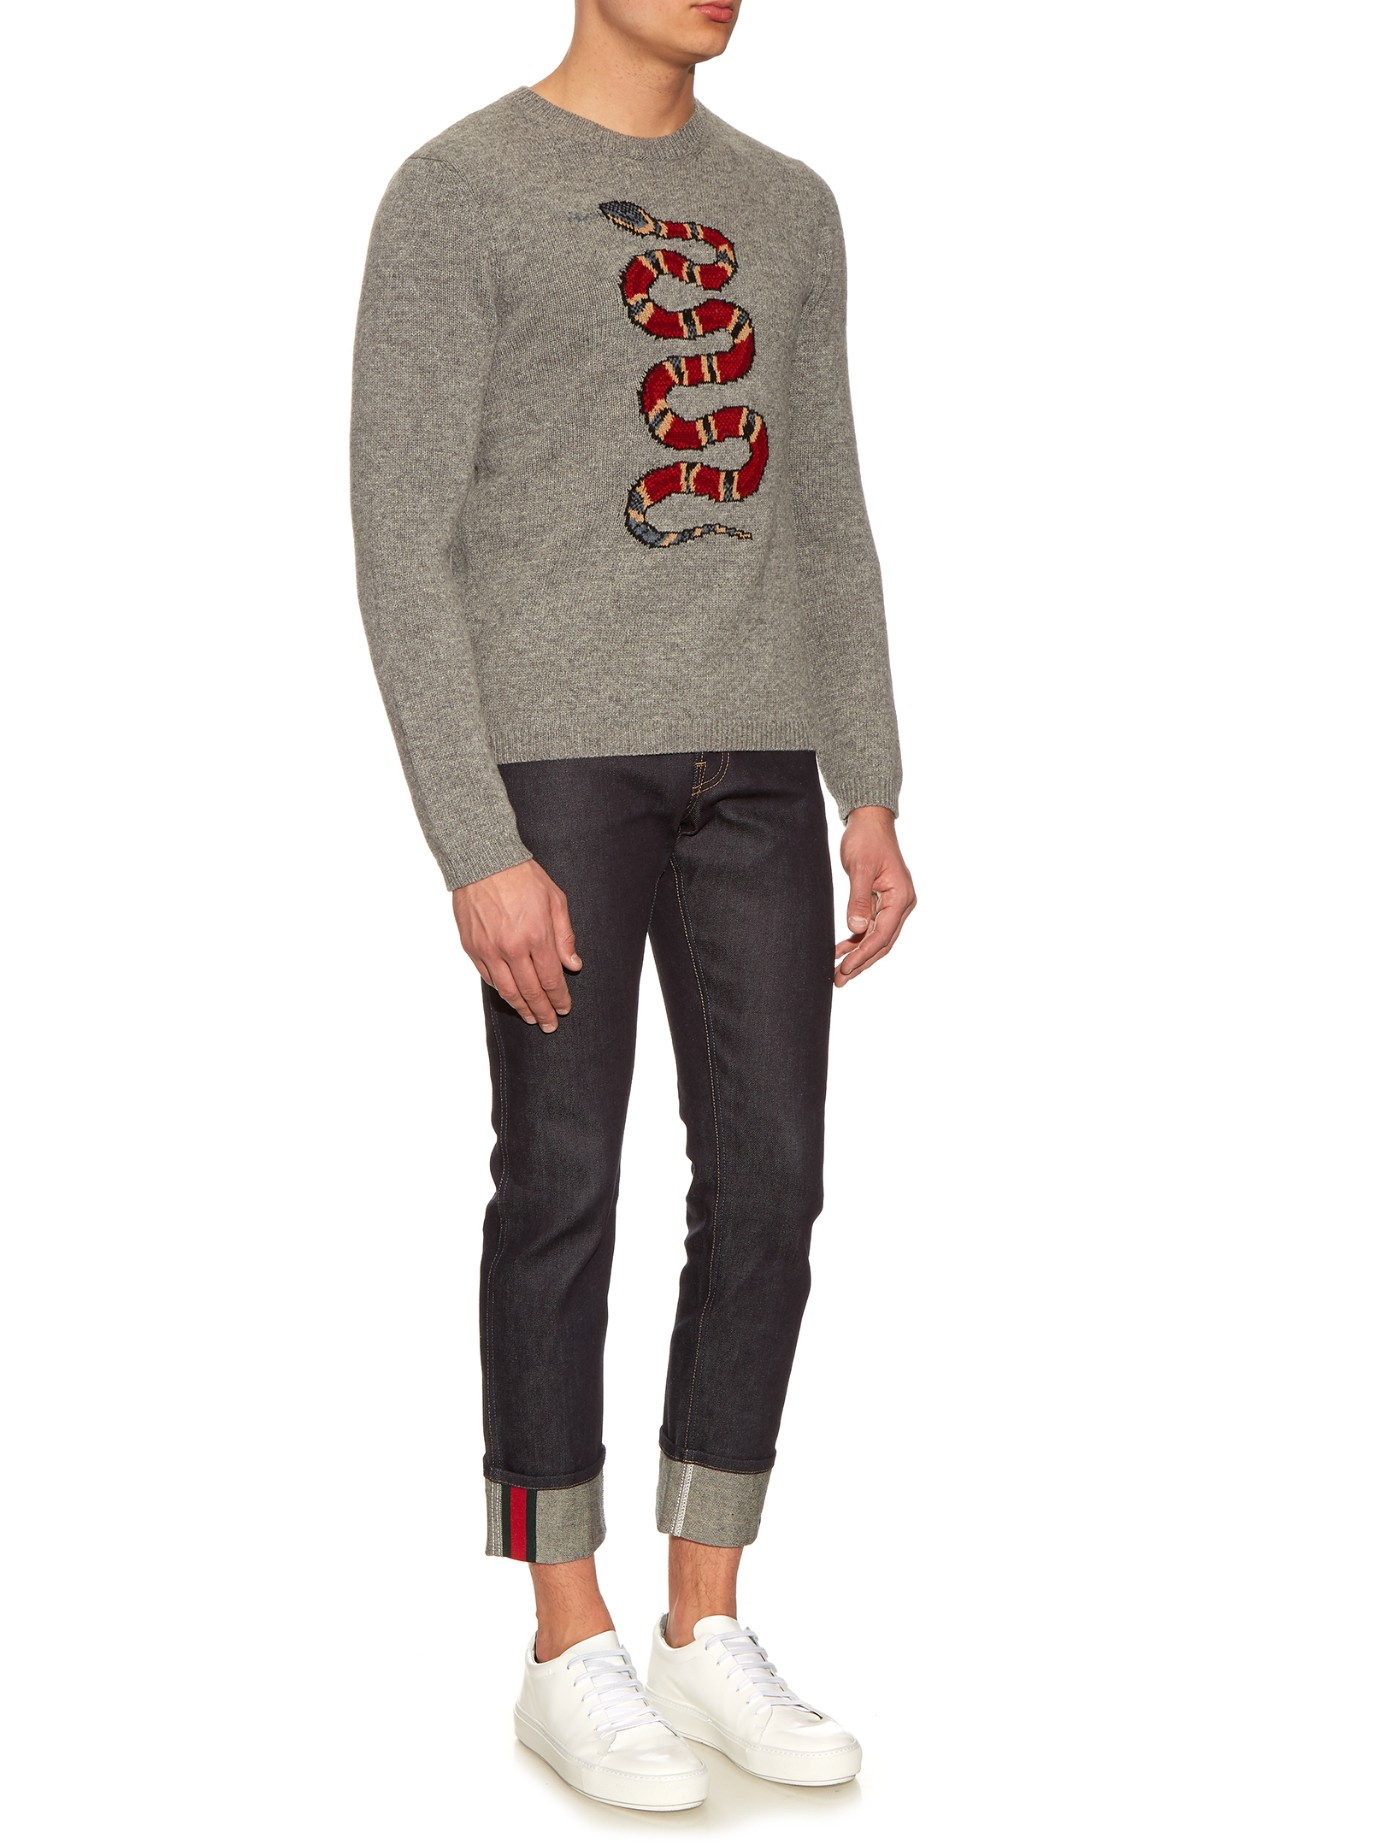 Gucci Snake-intarsia Wool-knit Sweater for Men - Lyst